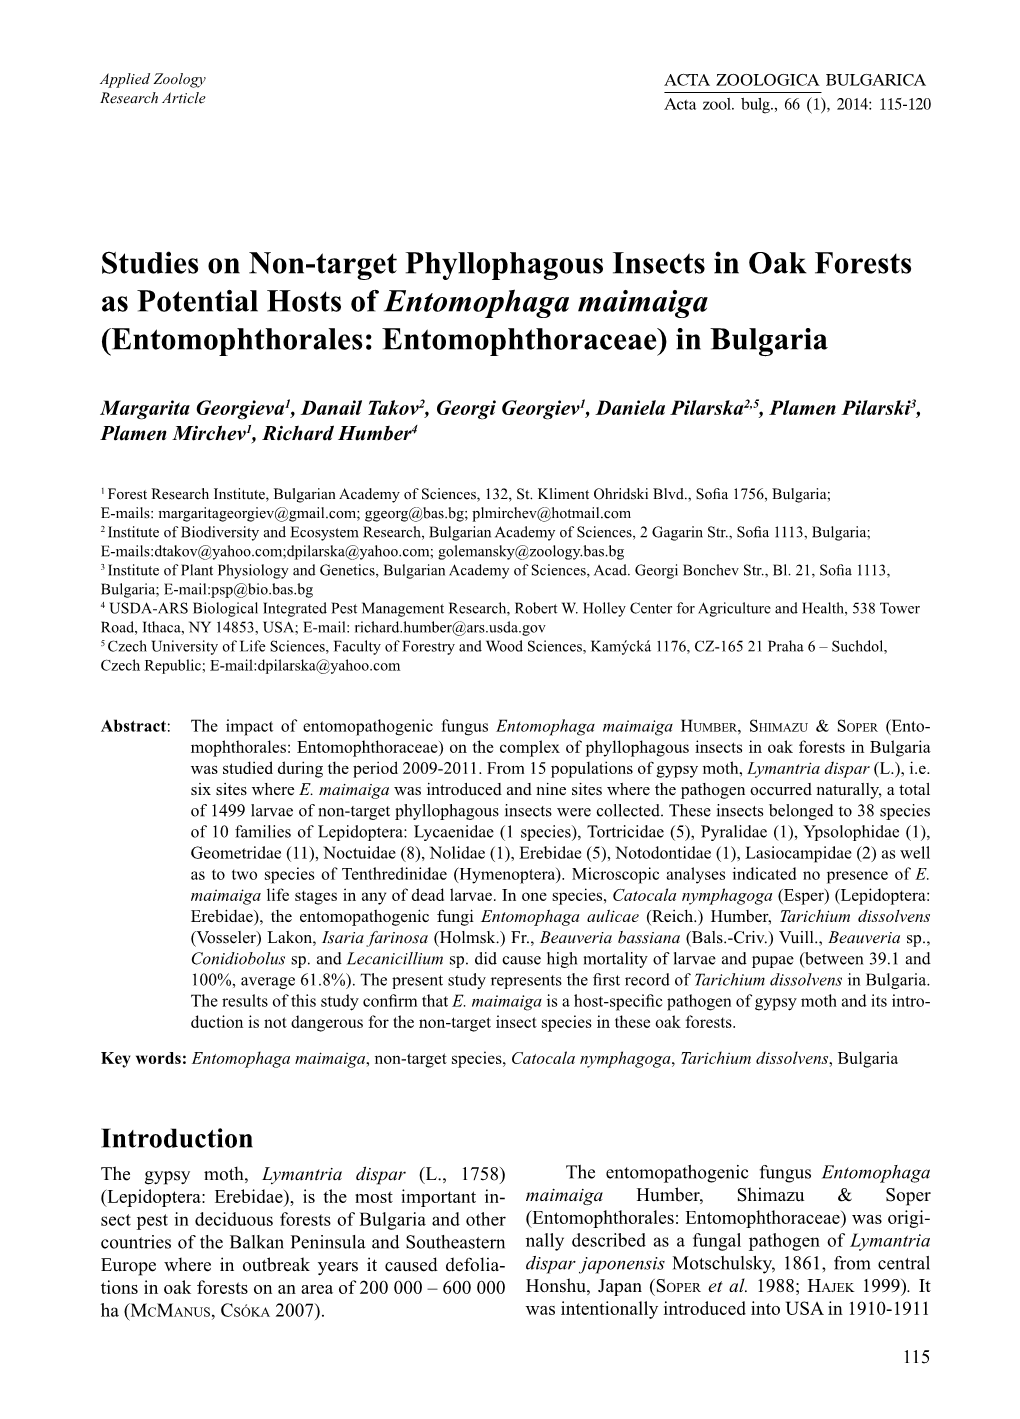 Studies on Non-Target Phyllophagous Insects in Oak Forests As Potential Hosts of Entomophaga Maimaiga (Entomophthorales: Entomophthoraceae) in Bulgaria